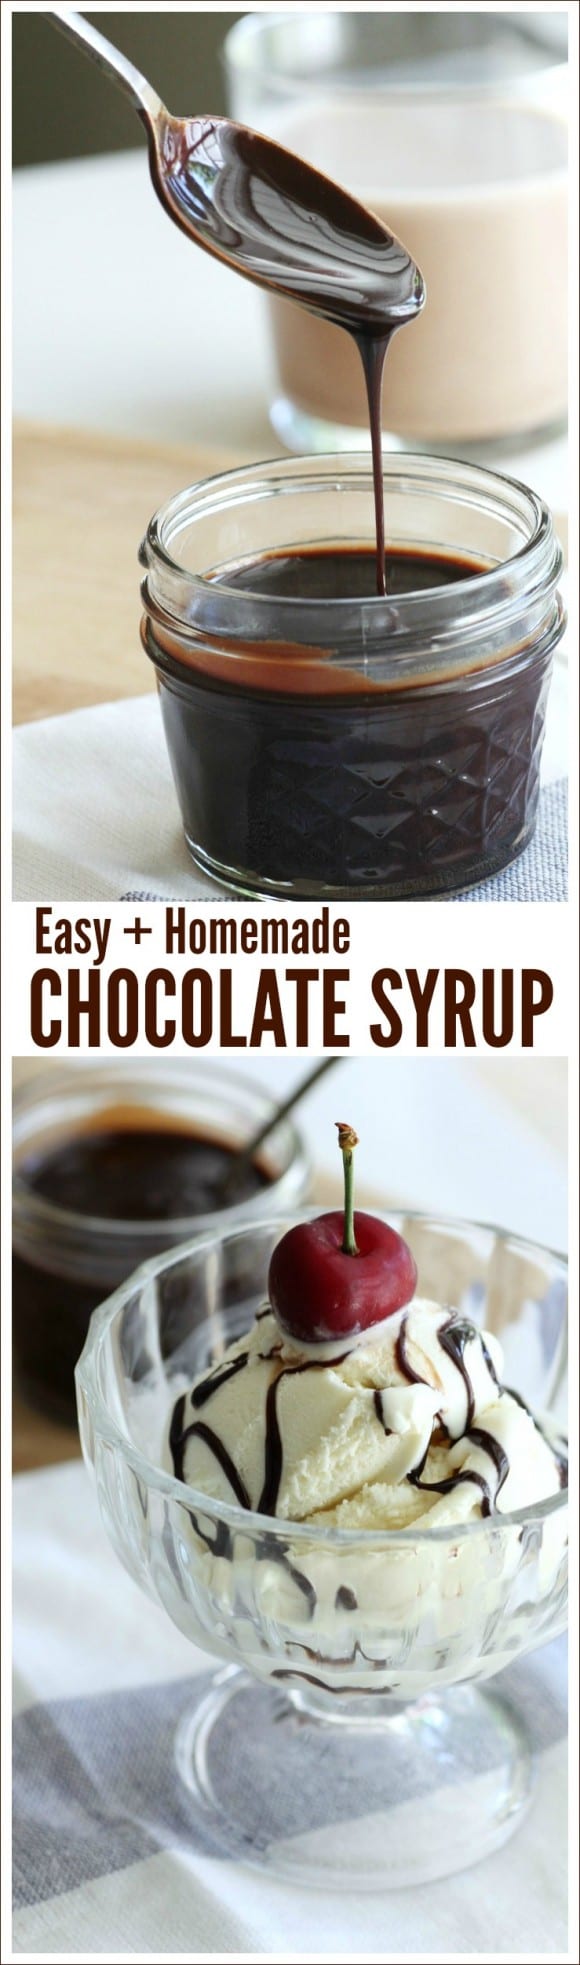 Easy Chocolate Syrup Recipe | CatchMyParty.com